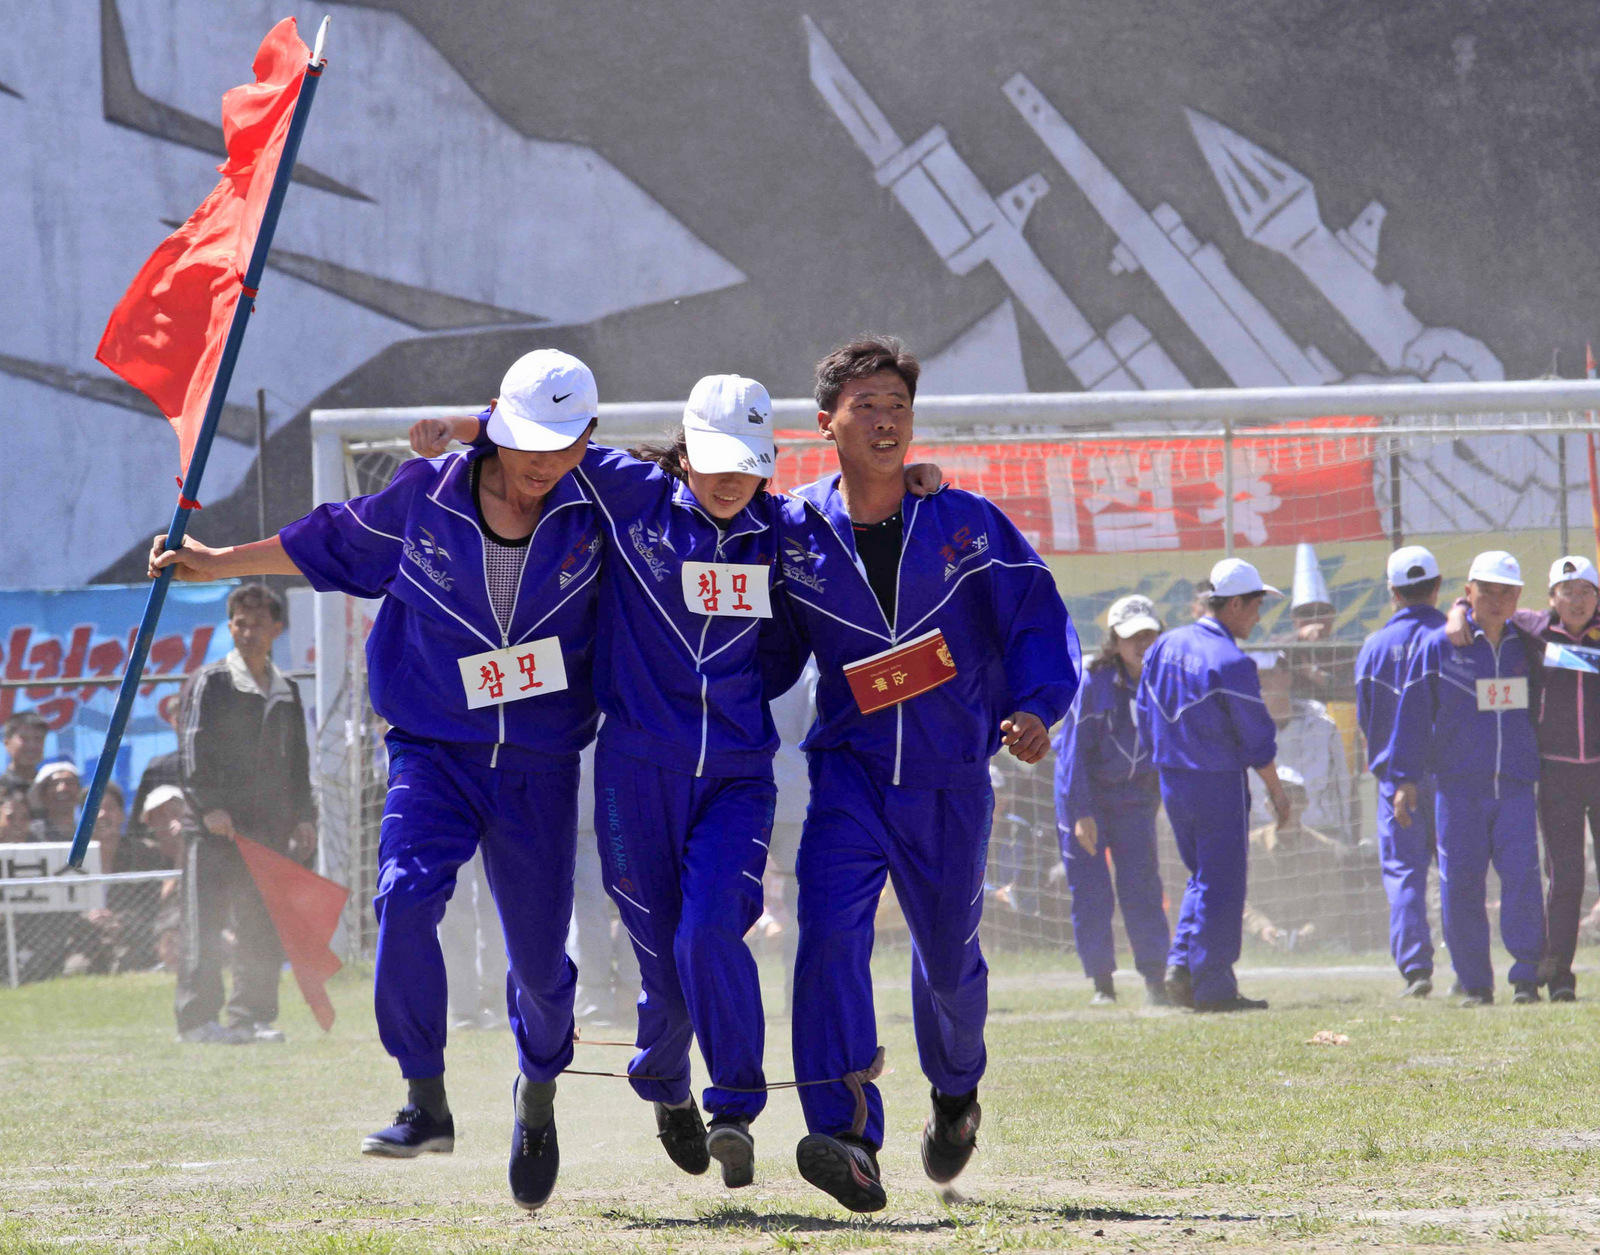 North Korean workers, with their legs tied together, take part in a competition as they celebrate May Day at the Pyongyang Thermal Power Complex in Pyongyang, North Korea, Monday, May 1, 2017. International Workers' Day, which is also known as Labor Day in some countries, is being celebrated worldwide. 